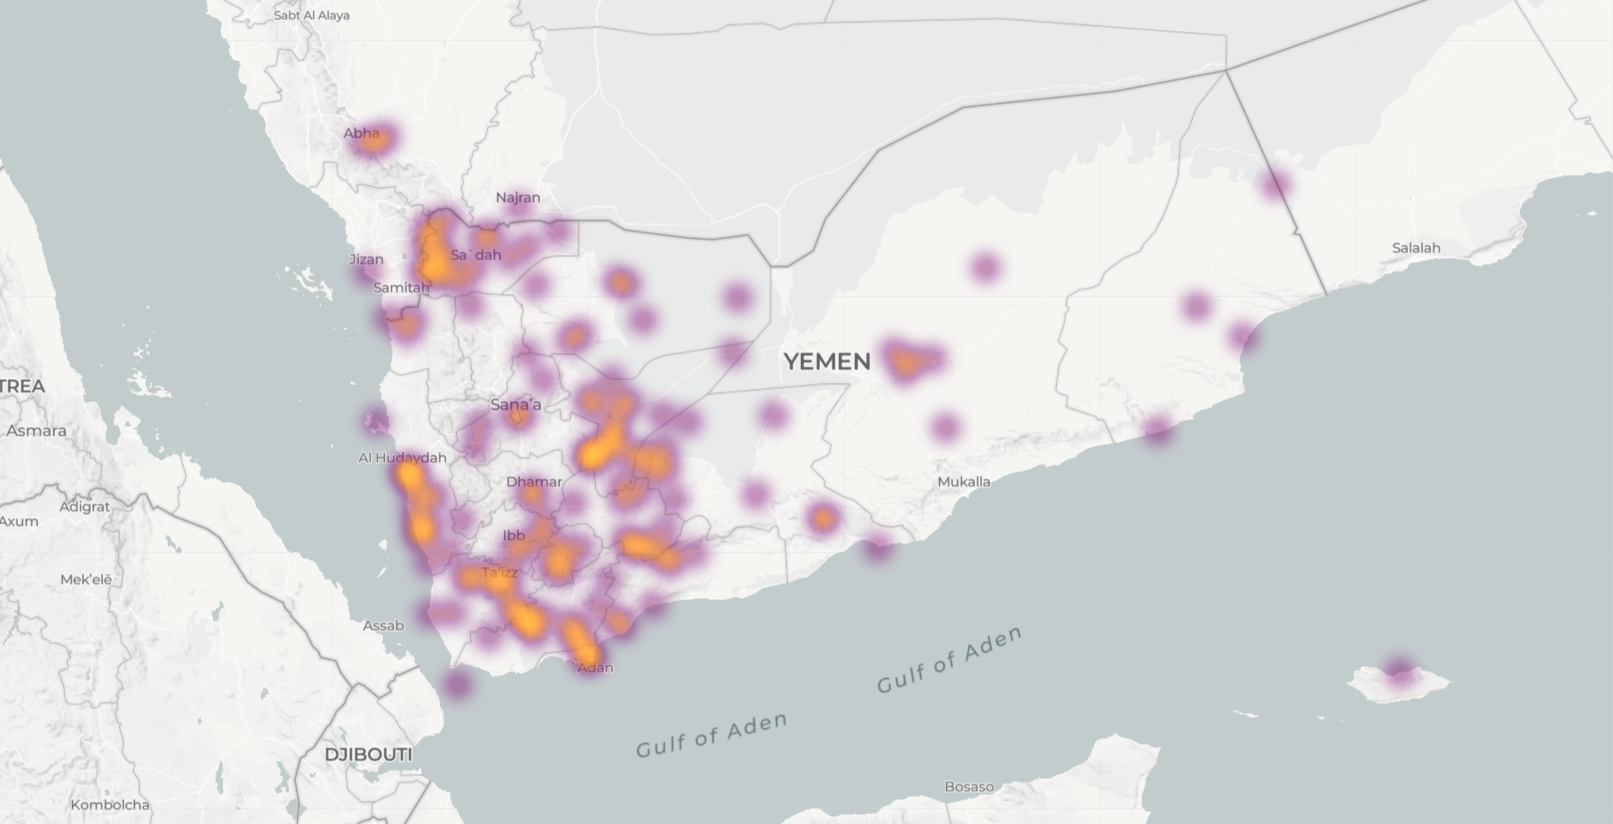 Military operations in Yemen between in the past 3 months